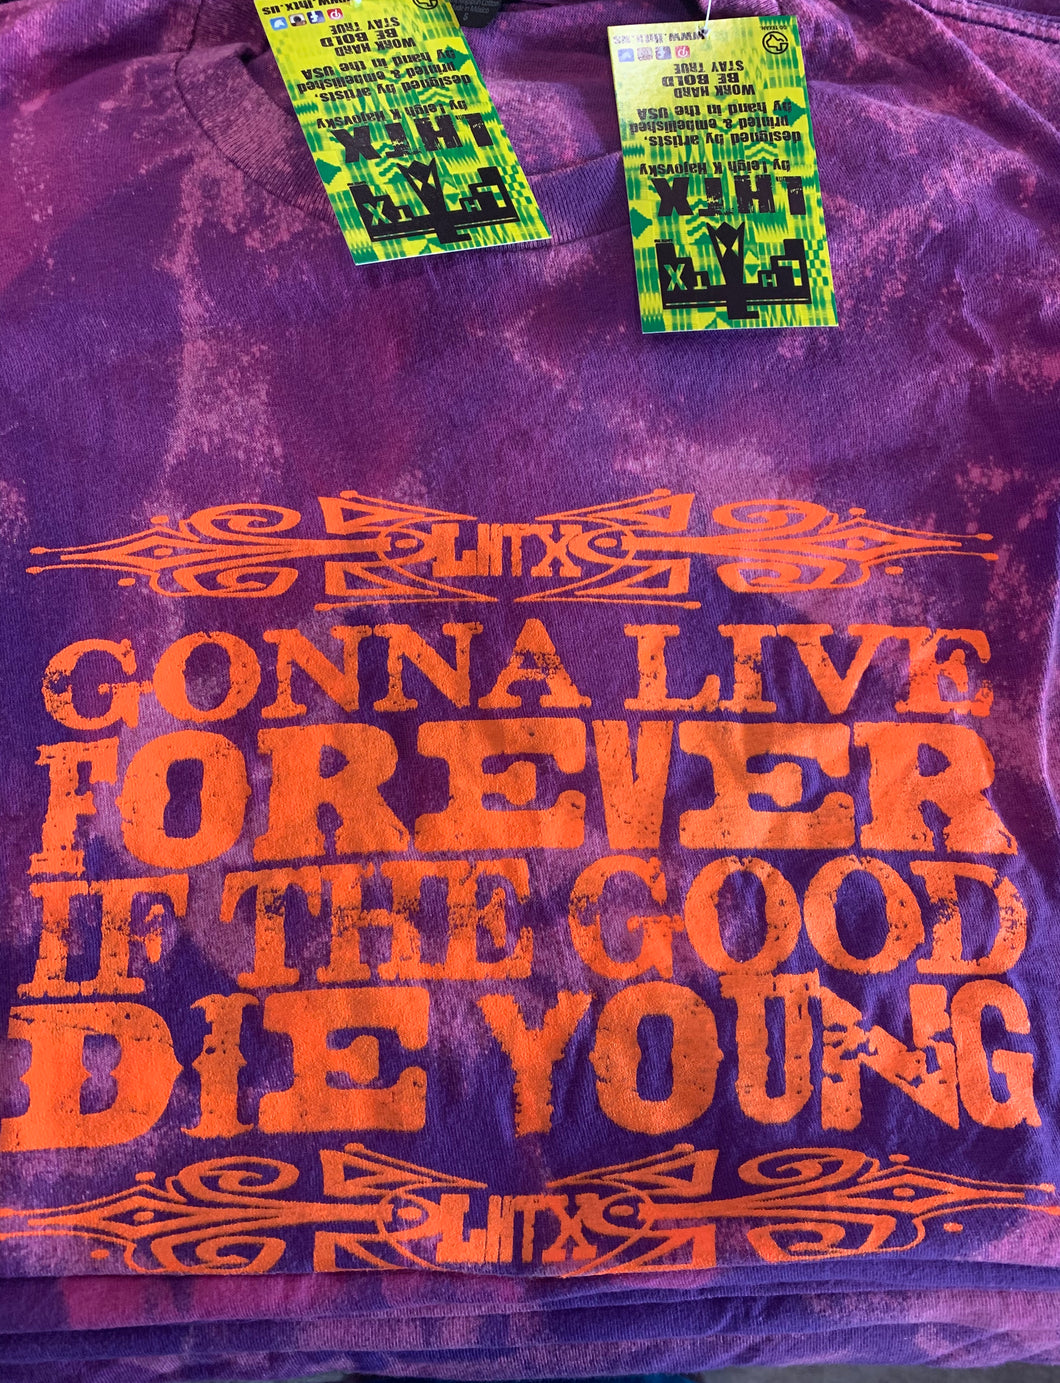 If the Good die Young T-shirt